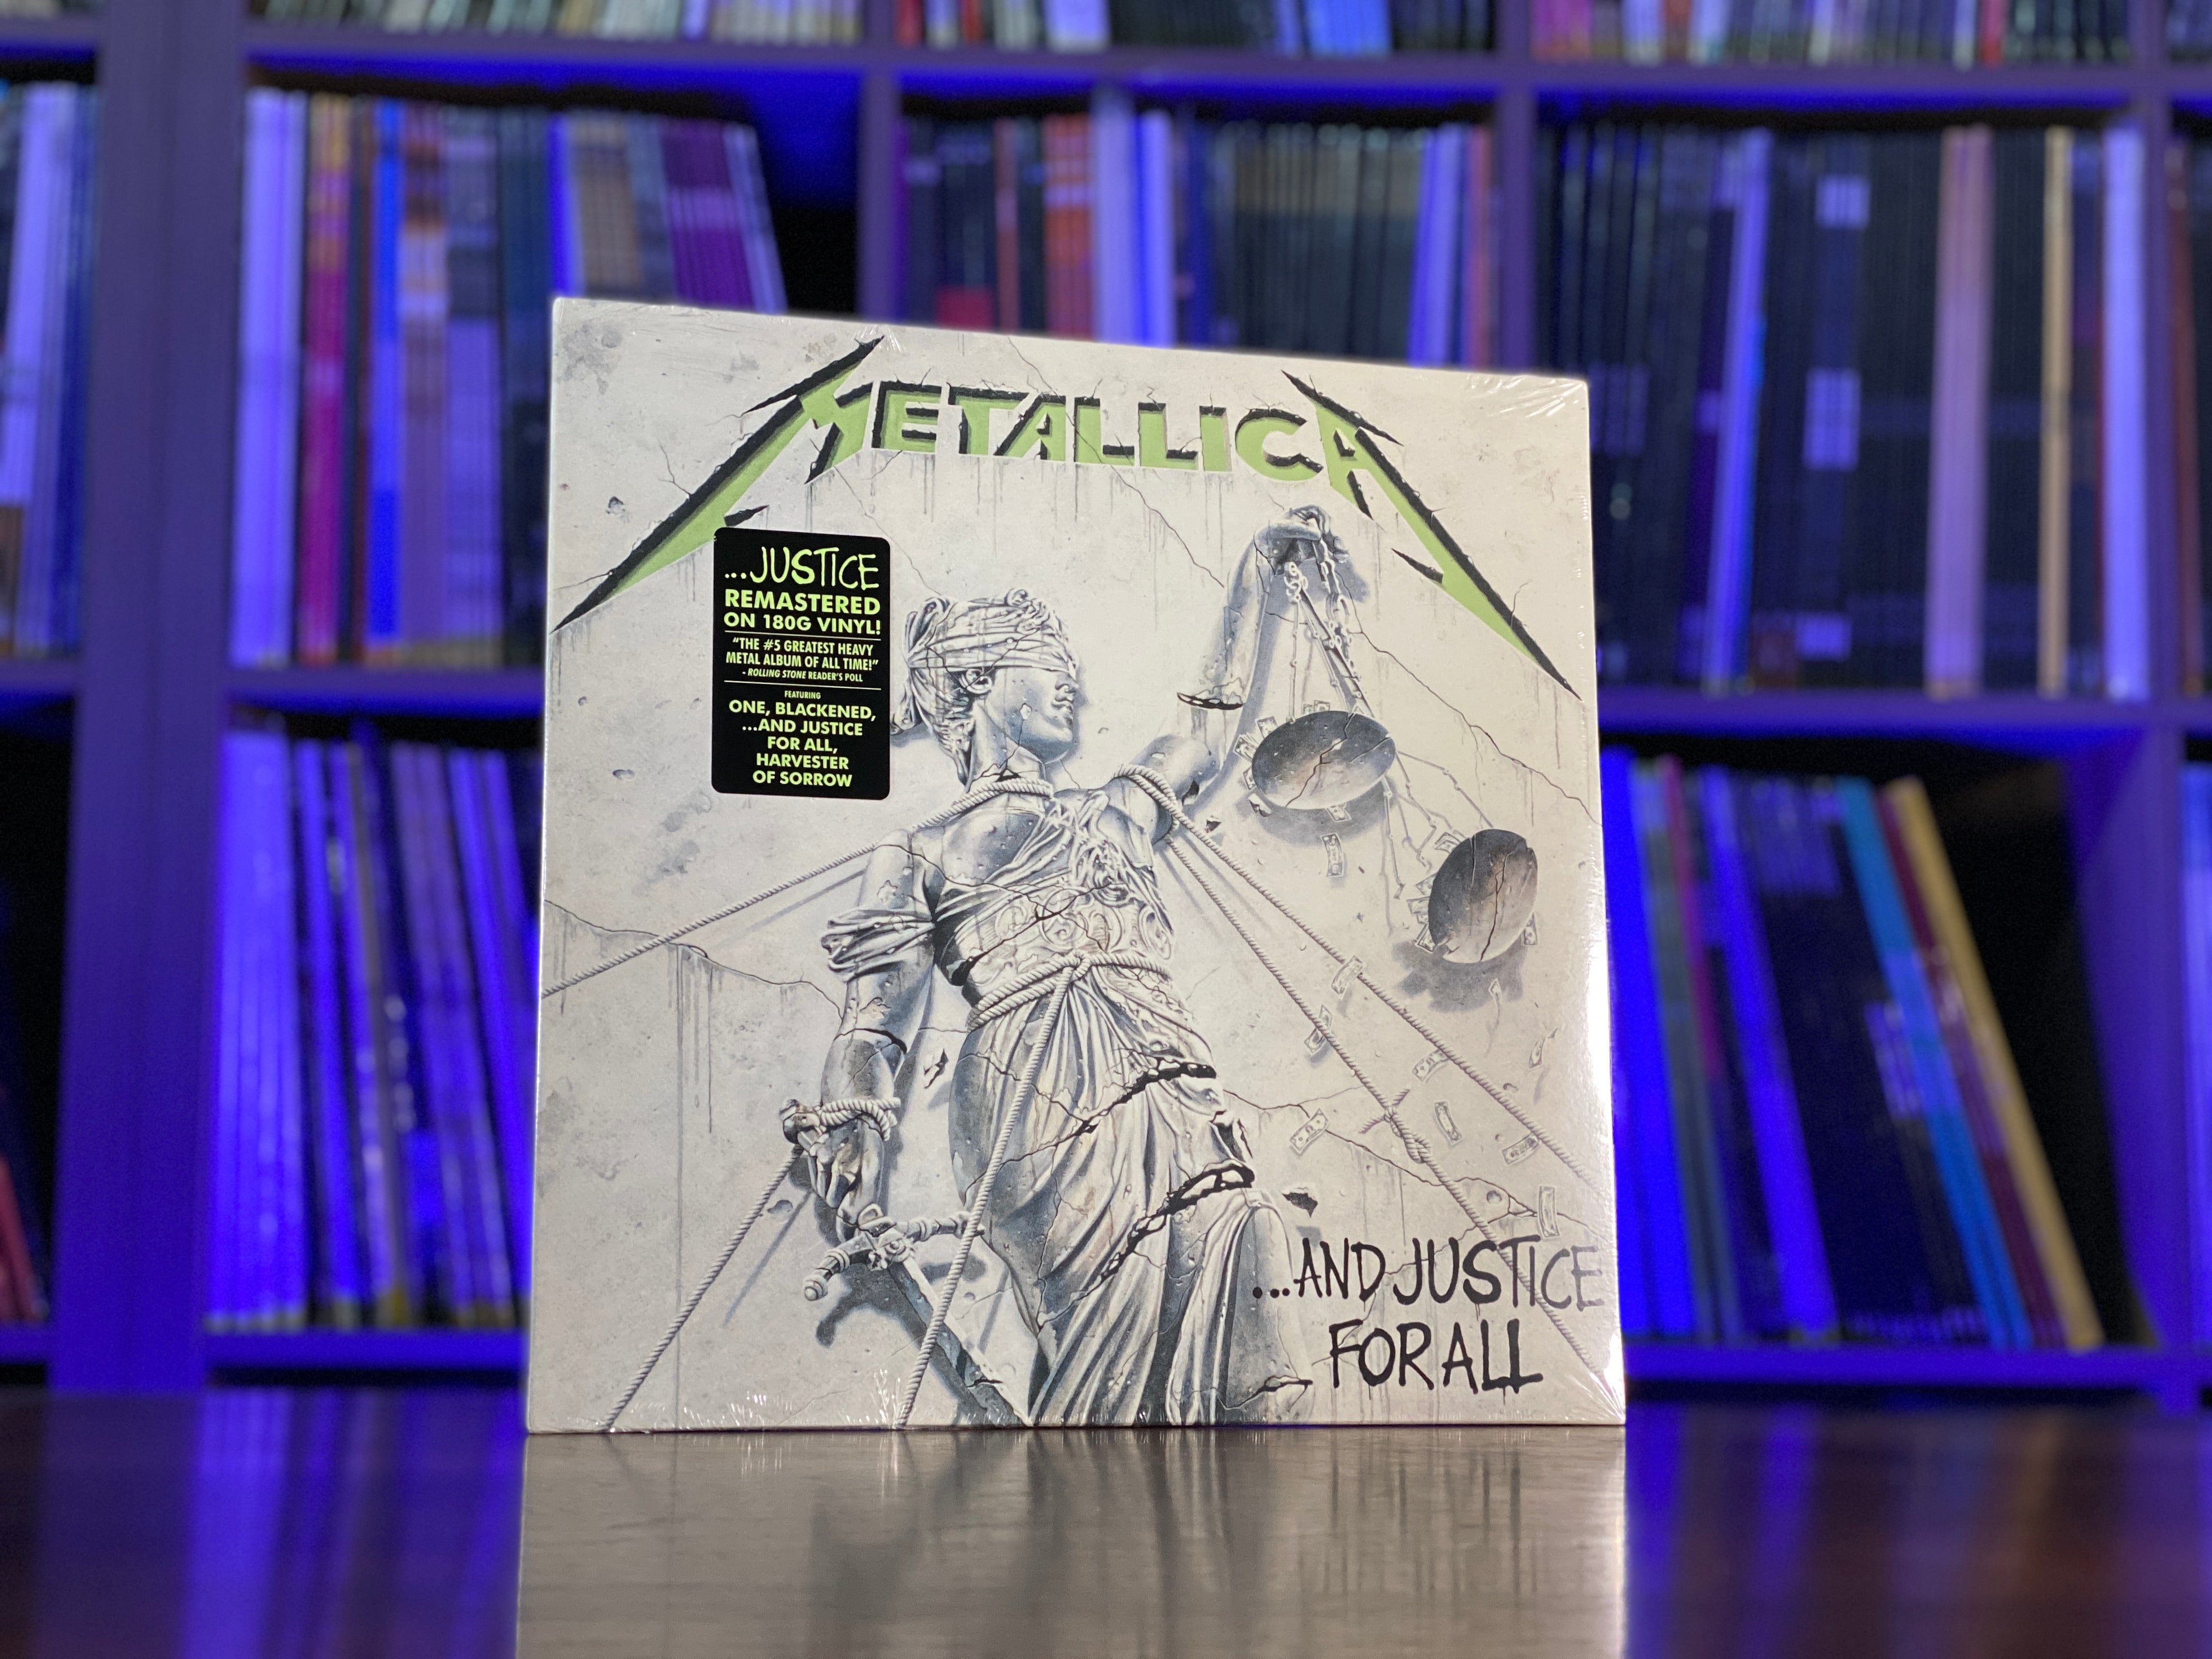 Metallica - And Justice For All (CD)